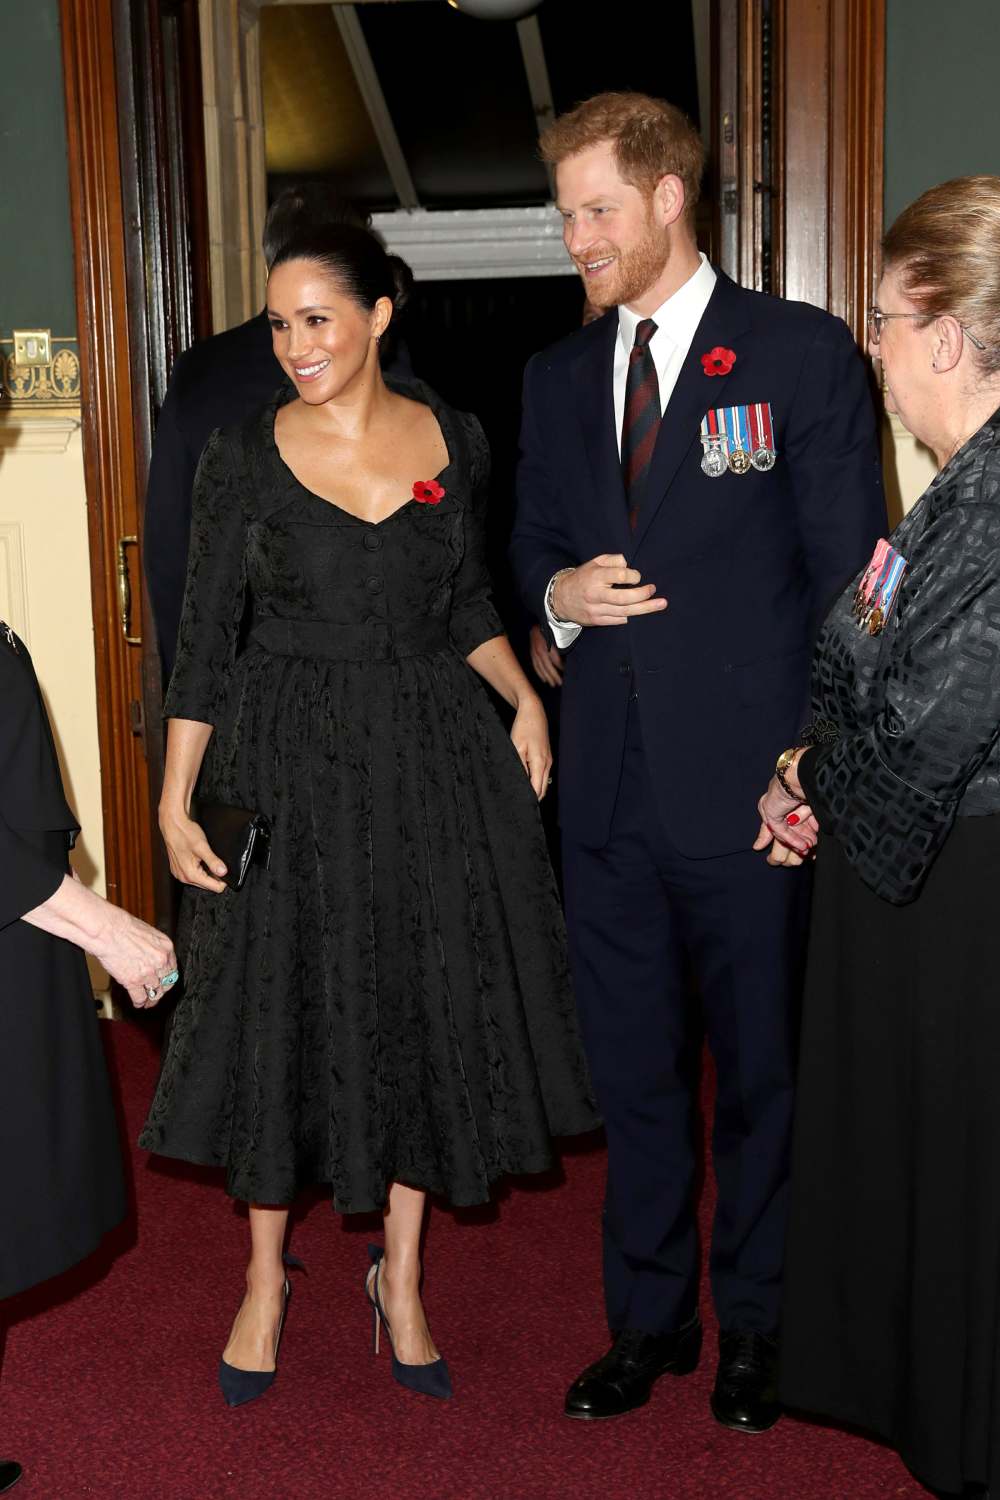 Duchess Meghan, Duchess Kate, Prince William and Prince Harry Reunite at Festival of Remembrance Service